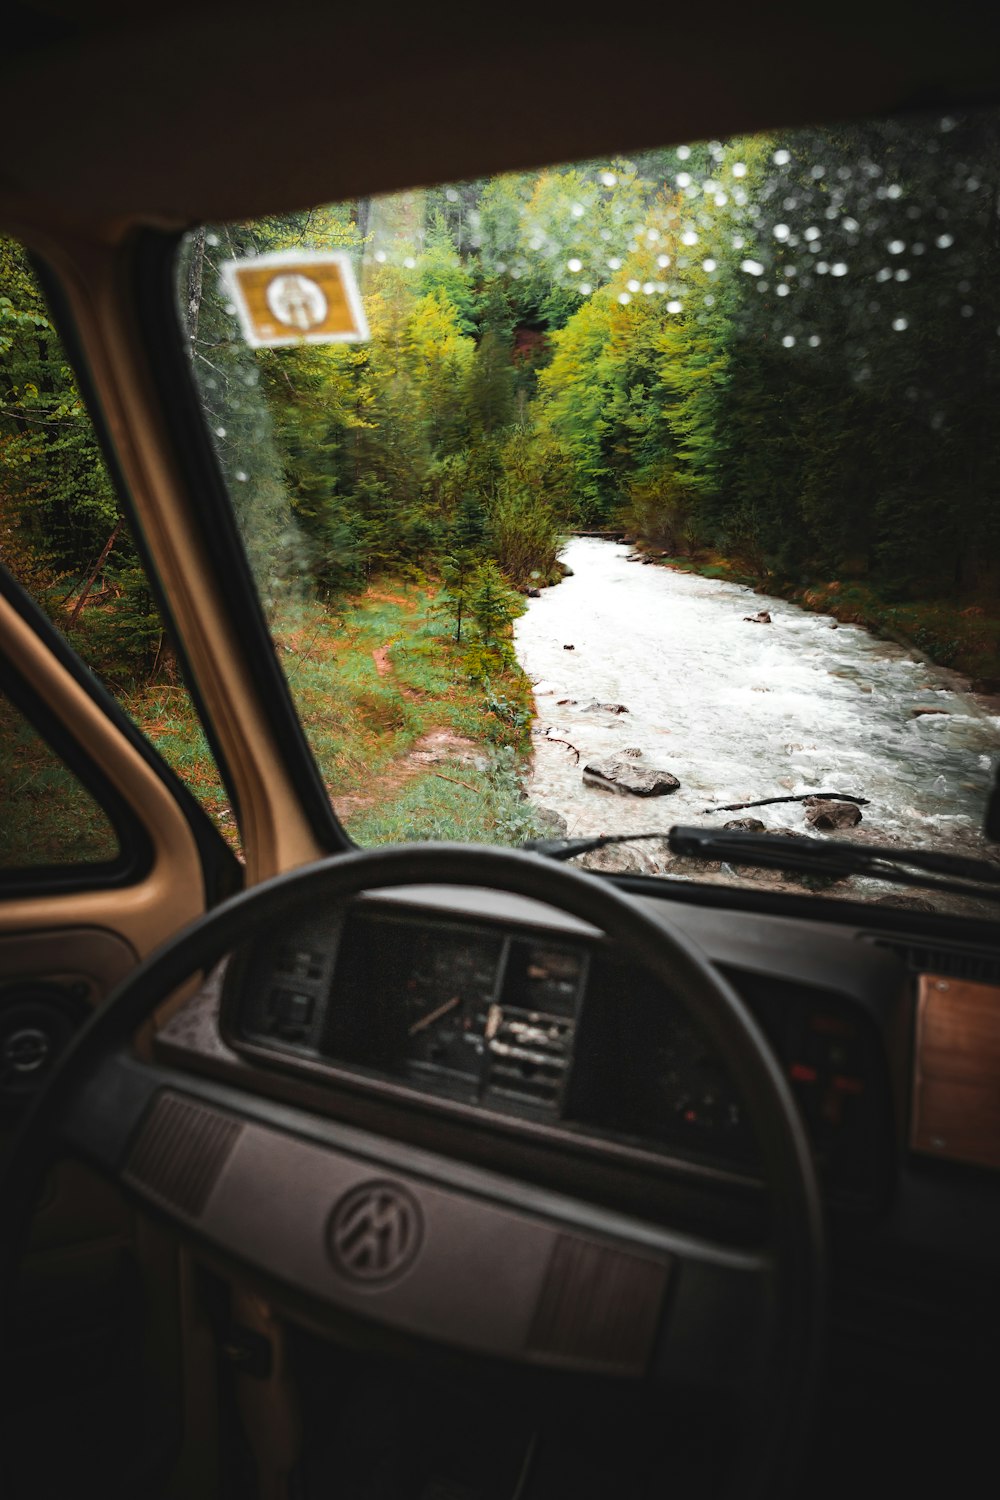 a view from inside a vehicle looking at a river